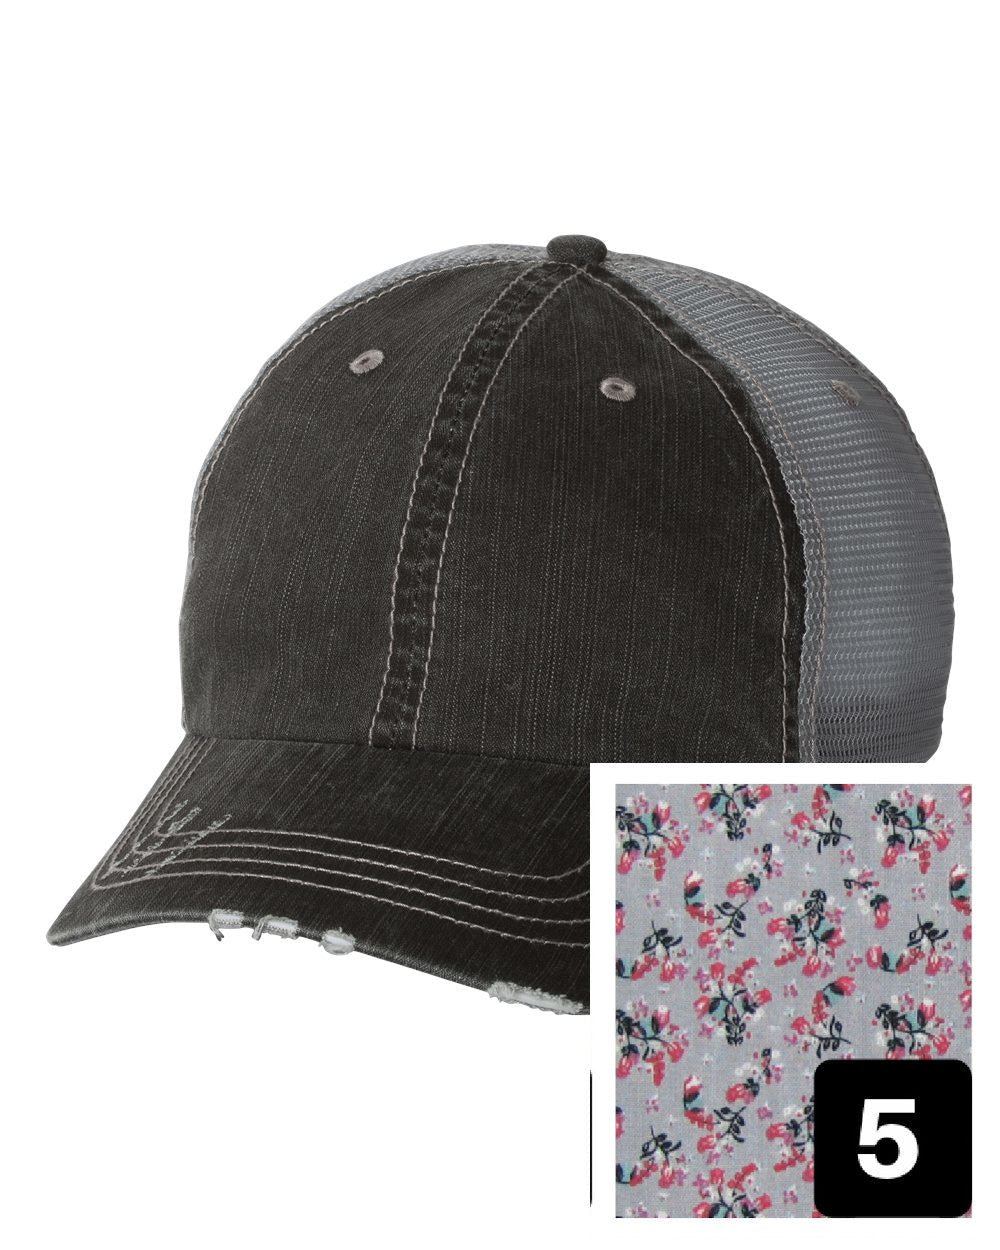 gray distressed trucker hat with purple and pink floral fabric state of Utah